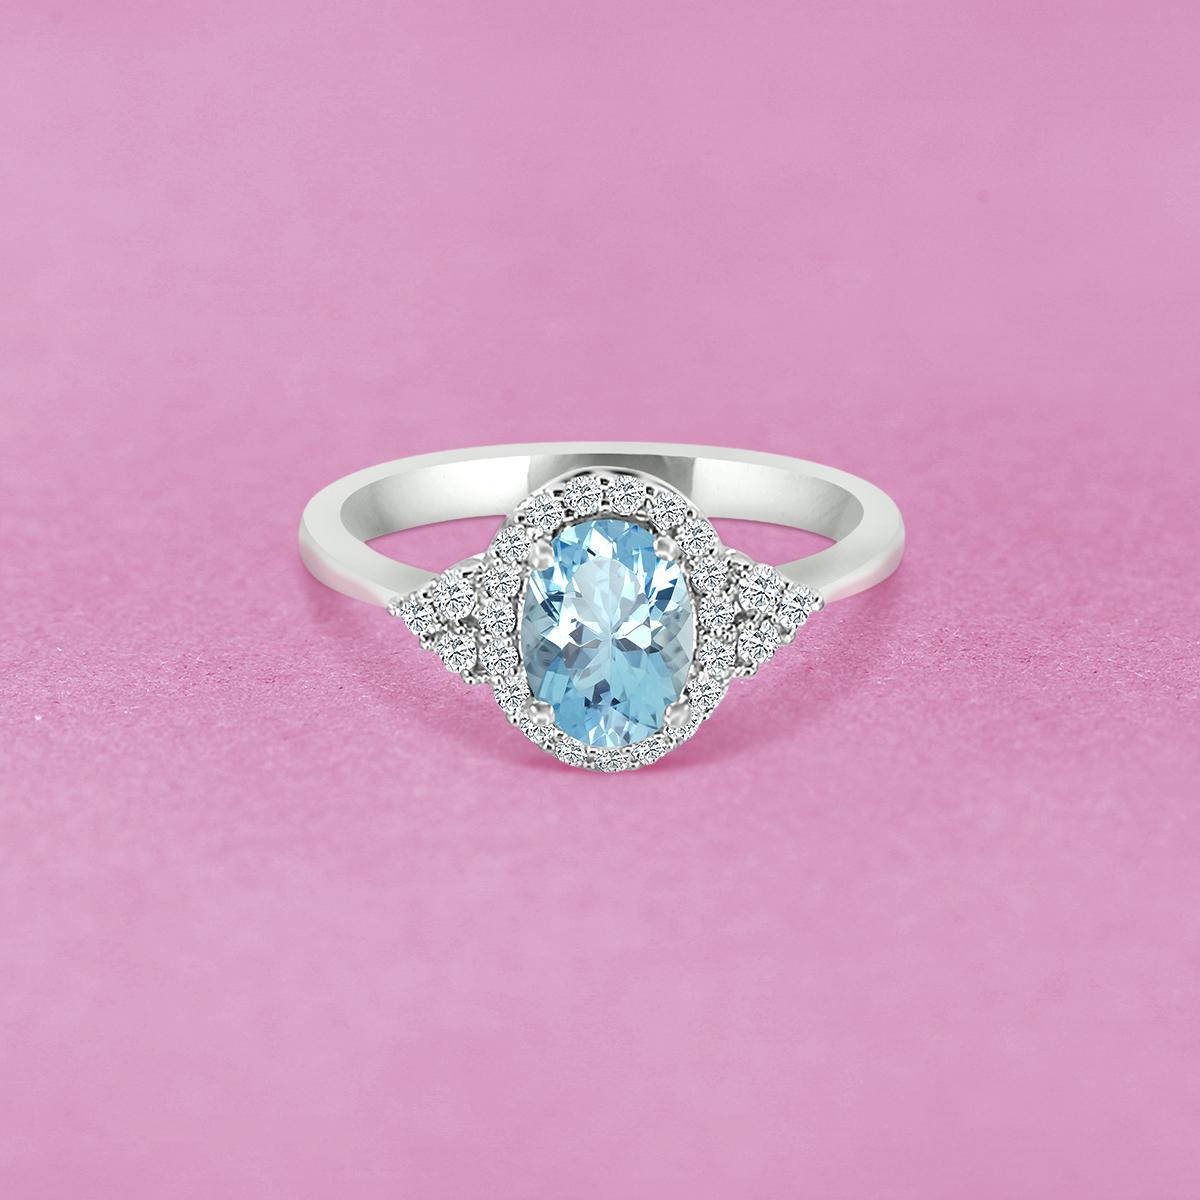 Modern 14K White Gold 0.63cts Aquamarine And Diamond Ring. Style# TS1216AQR 21054/3 For Sale